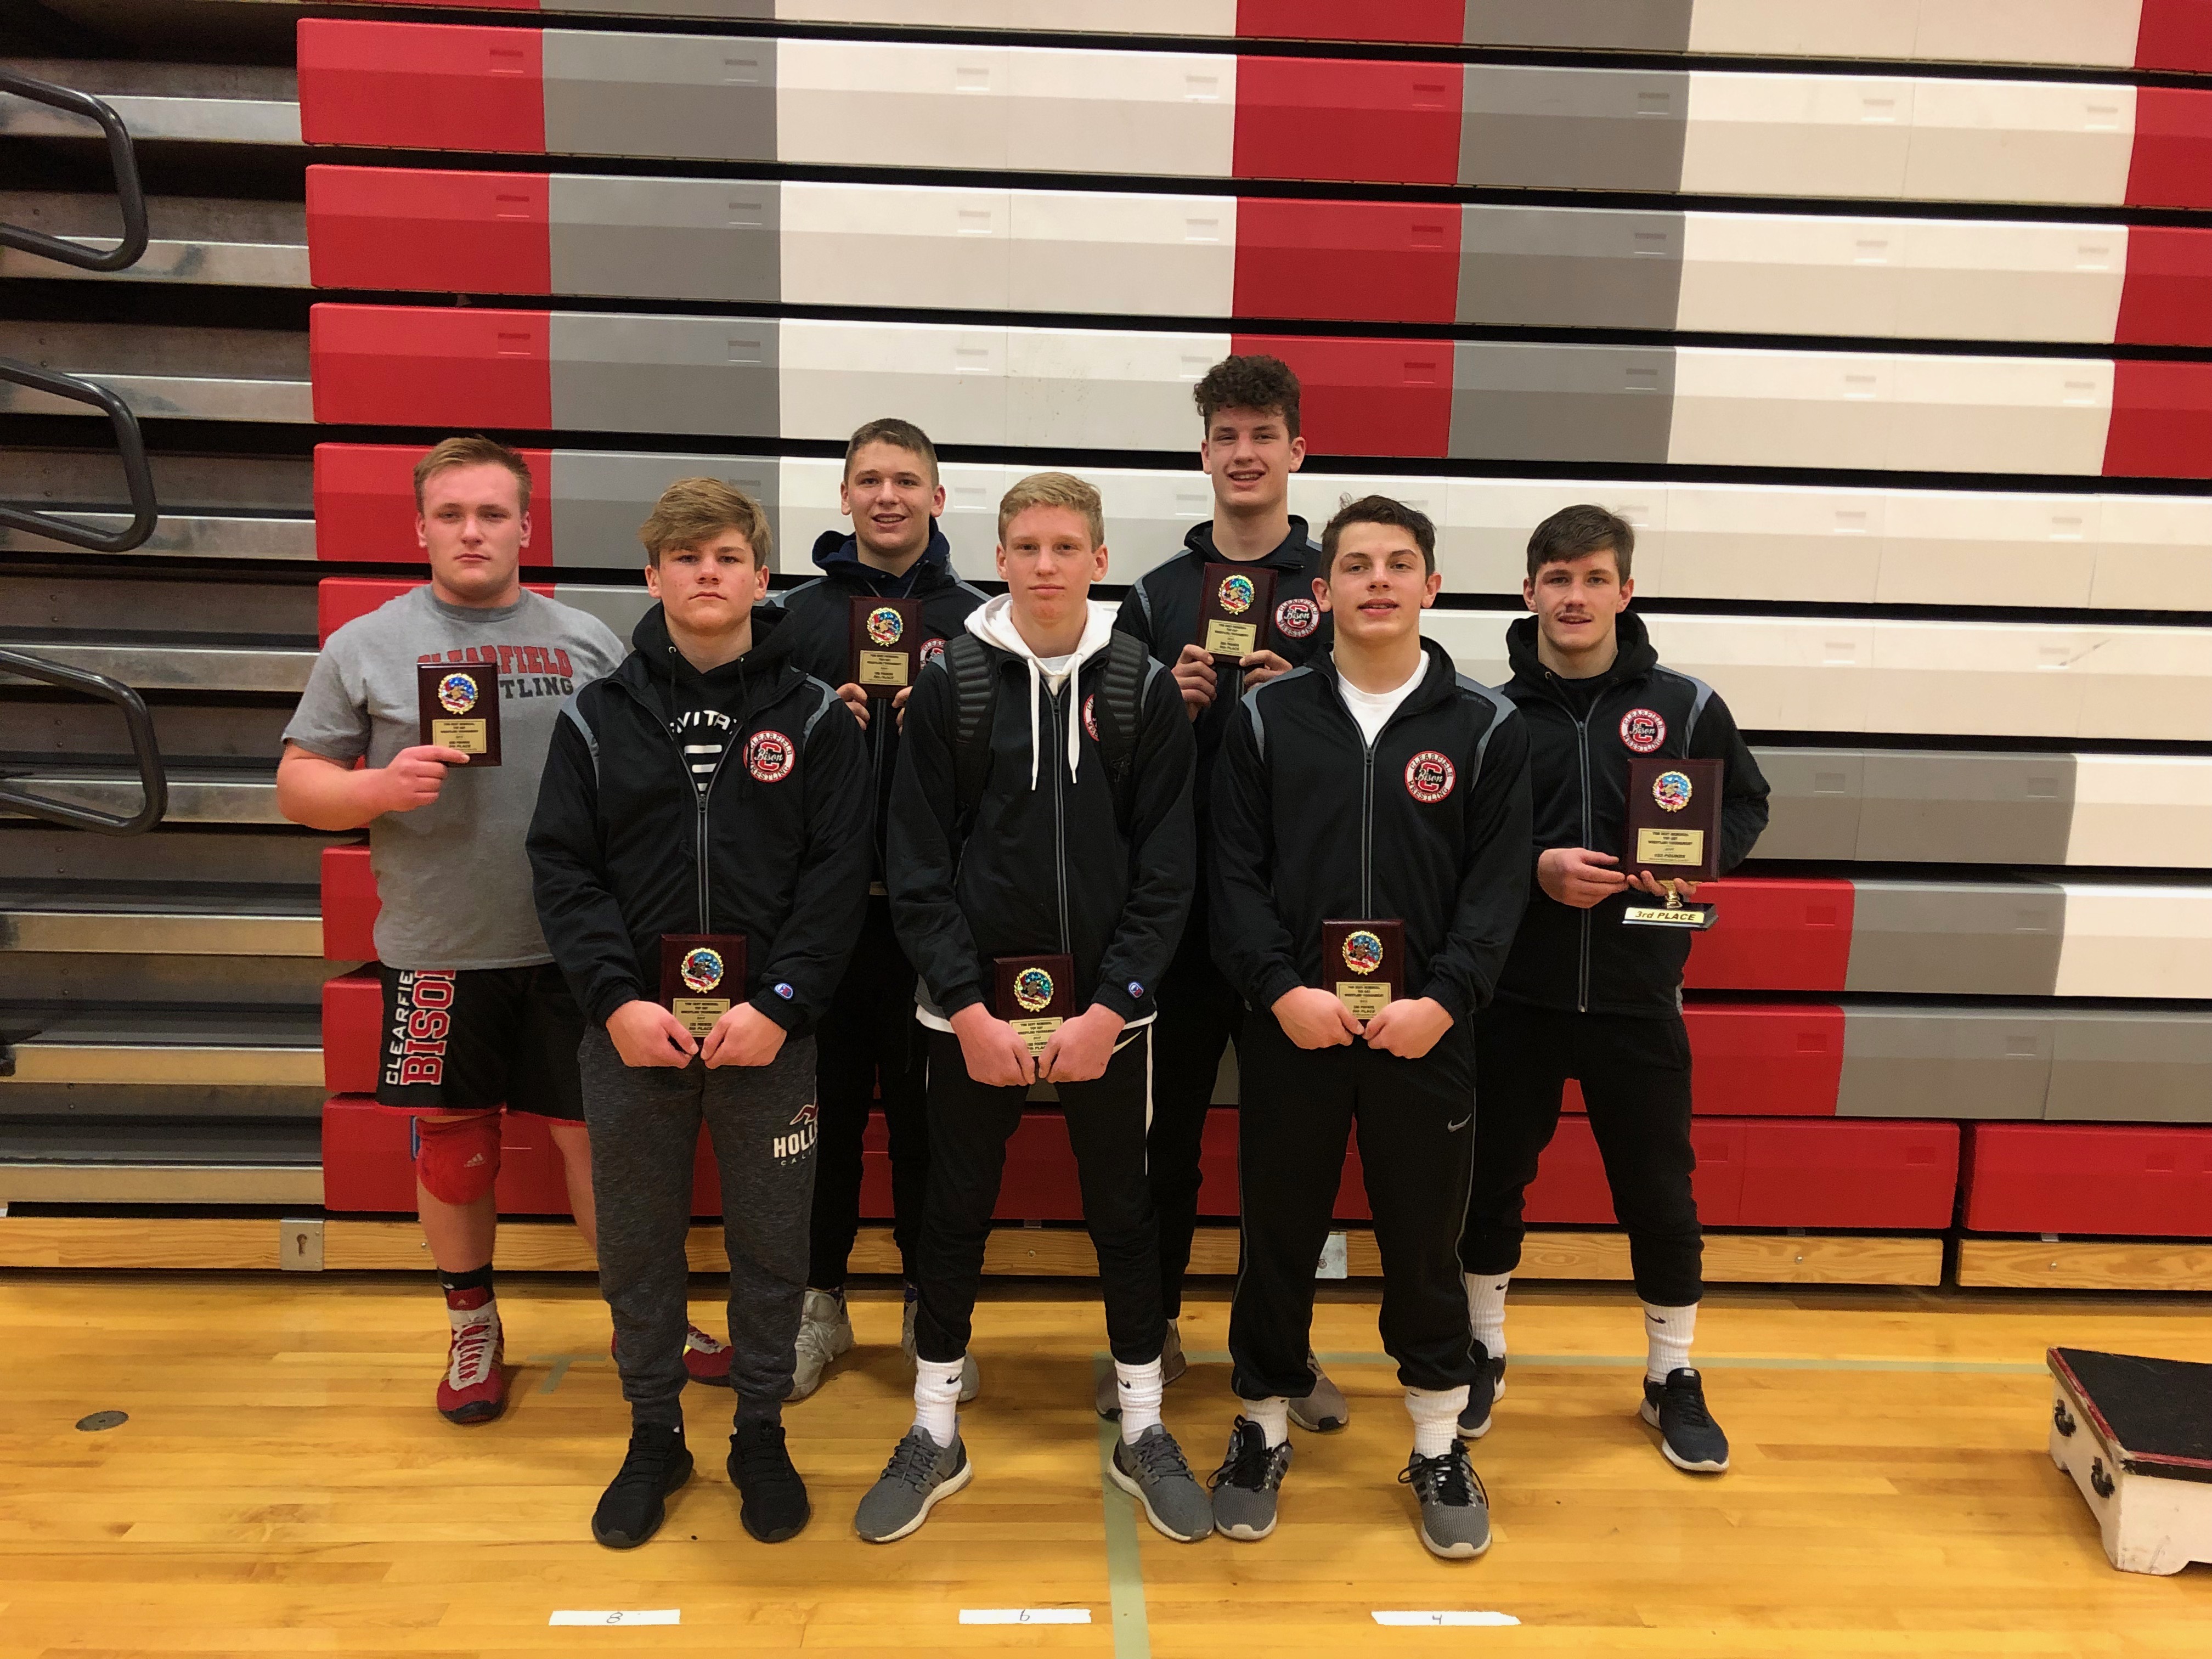 7 Bison Wrestlers Placed in the Top eight at the Top Hat Tournament this weekend. Front row (from left to right): Luke Freeland, Nolan Barr, Mark McGonigal
Back row: Avry Gisewhite, Nick Domico, Oliver Billotte, Caleb Freeland